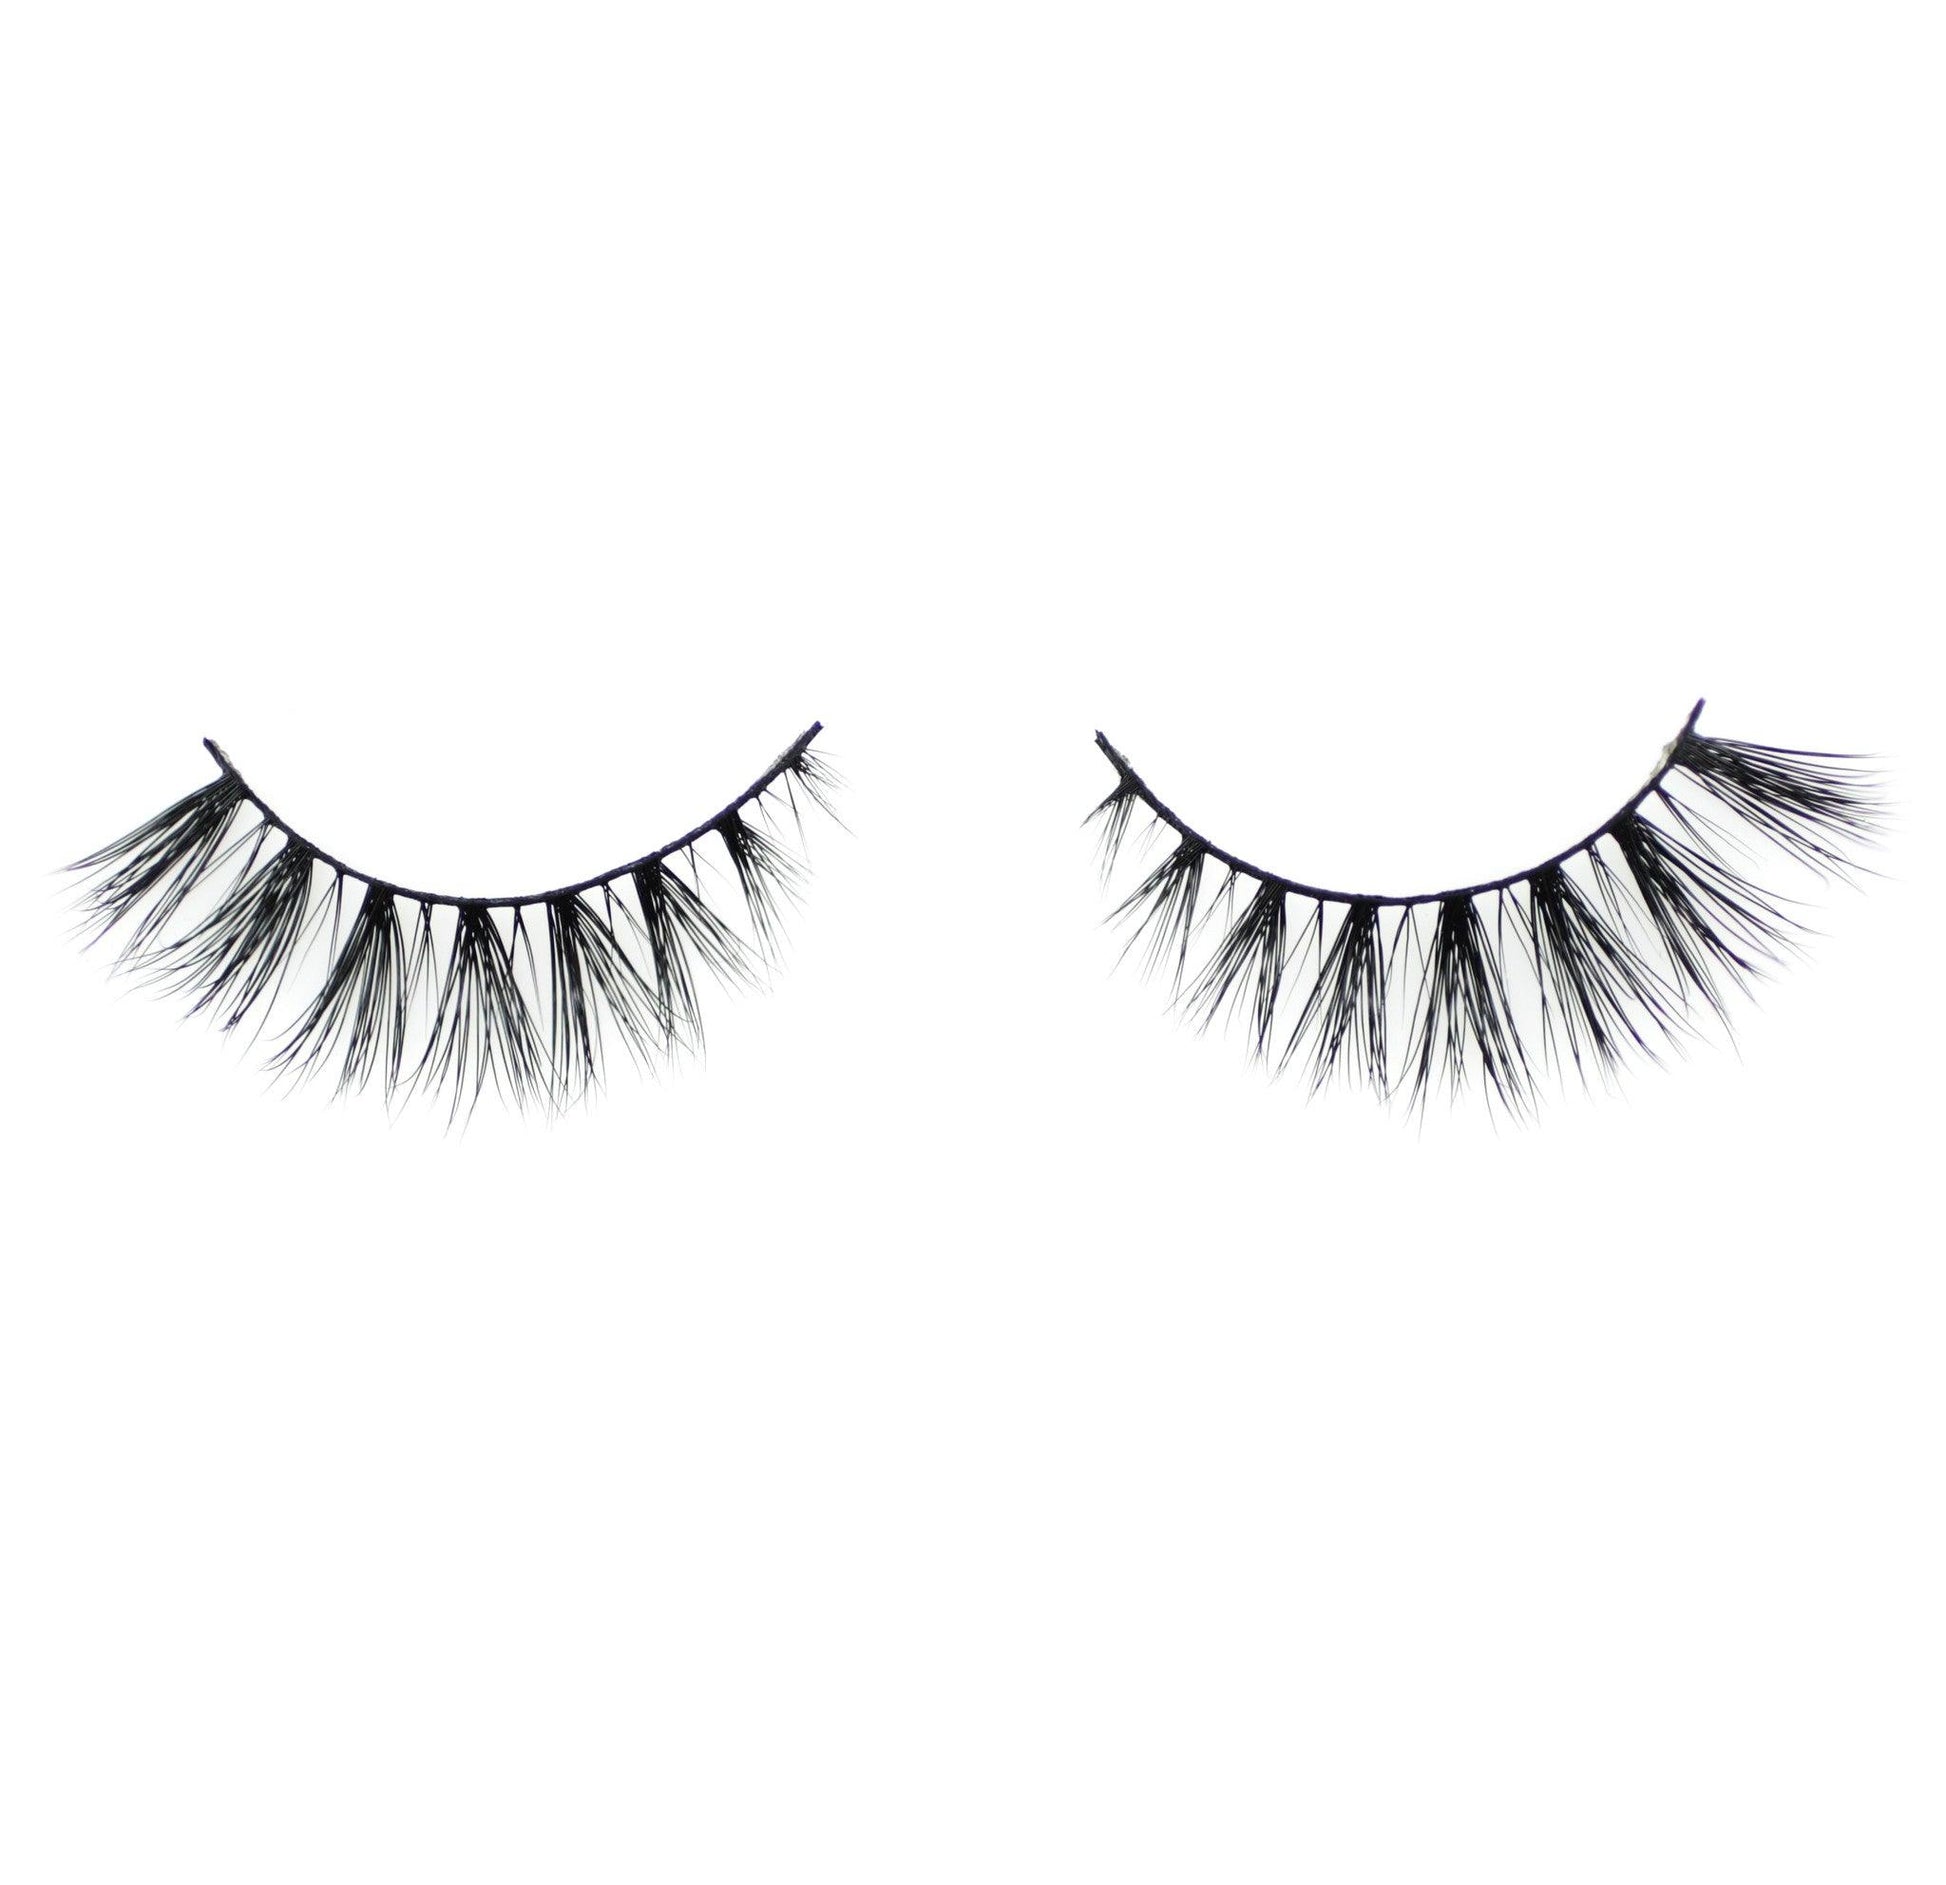 Mink eye lashes (6 photos) - Photography and Web Design - Los Angeles, US based Shopify Experts Revo Designs